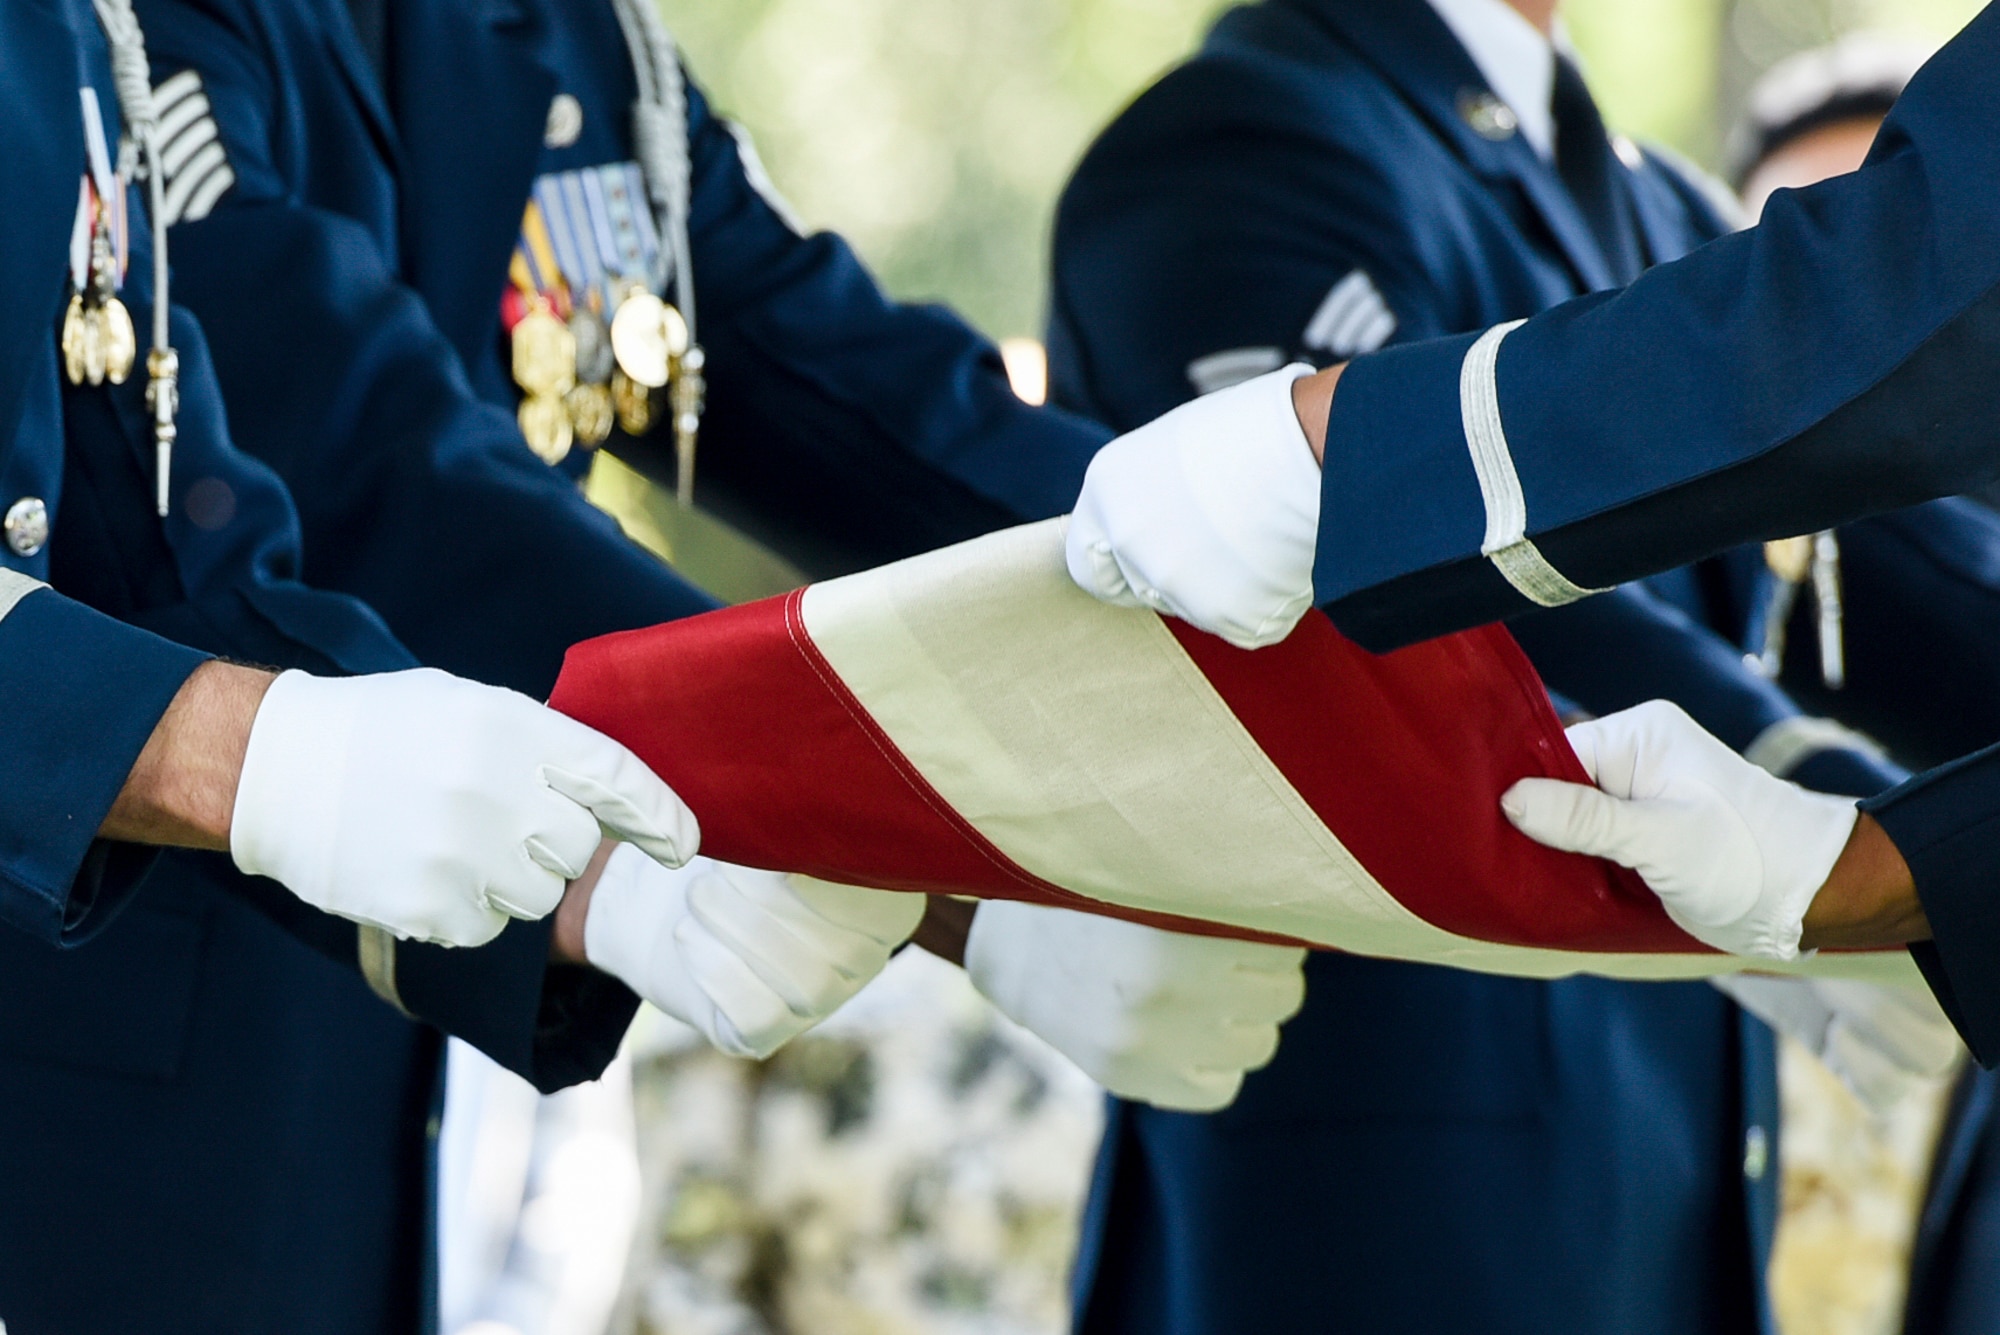 The U.S. Air Force Honor Guard folds the American flag during a graveside ceremony for former 2nd Lt. Malvin G. Whitfield at Arlington National Cemetery, Va., June 8, 2016. Whitfield joined the Army Air Forces in 1943 as a Tuskegee Airman, and later joined the Air Force Reserve as an officer. (U.S. Air Force photo/Staff Sgt. Alyssa C. Gibson)